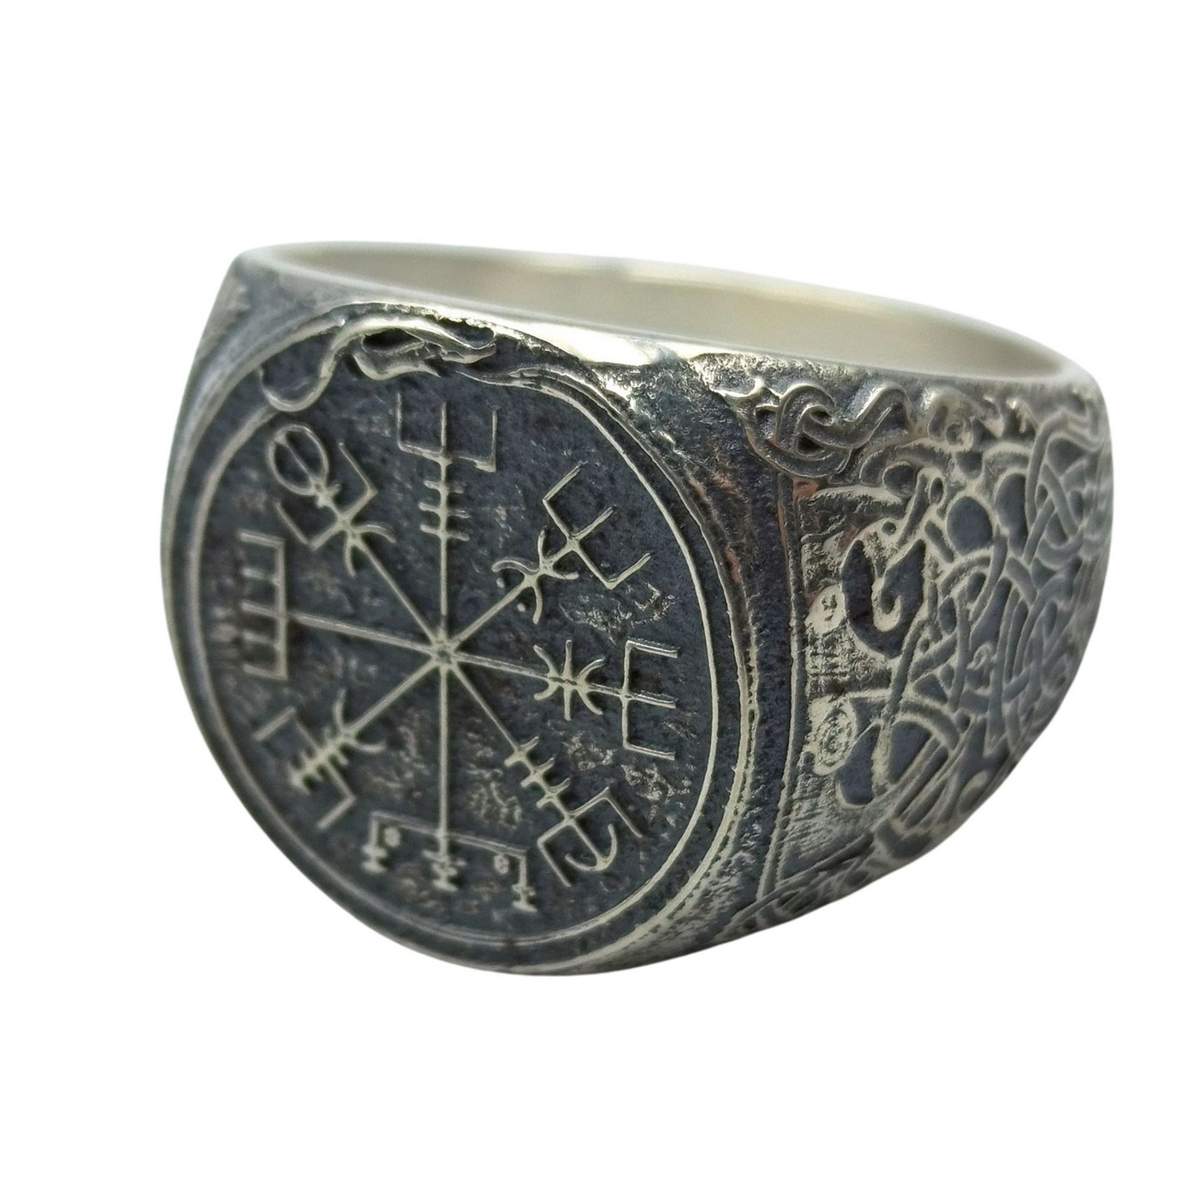 Vegvisir with Mammen ornament silver signet ring 6 US/CA  